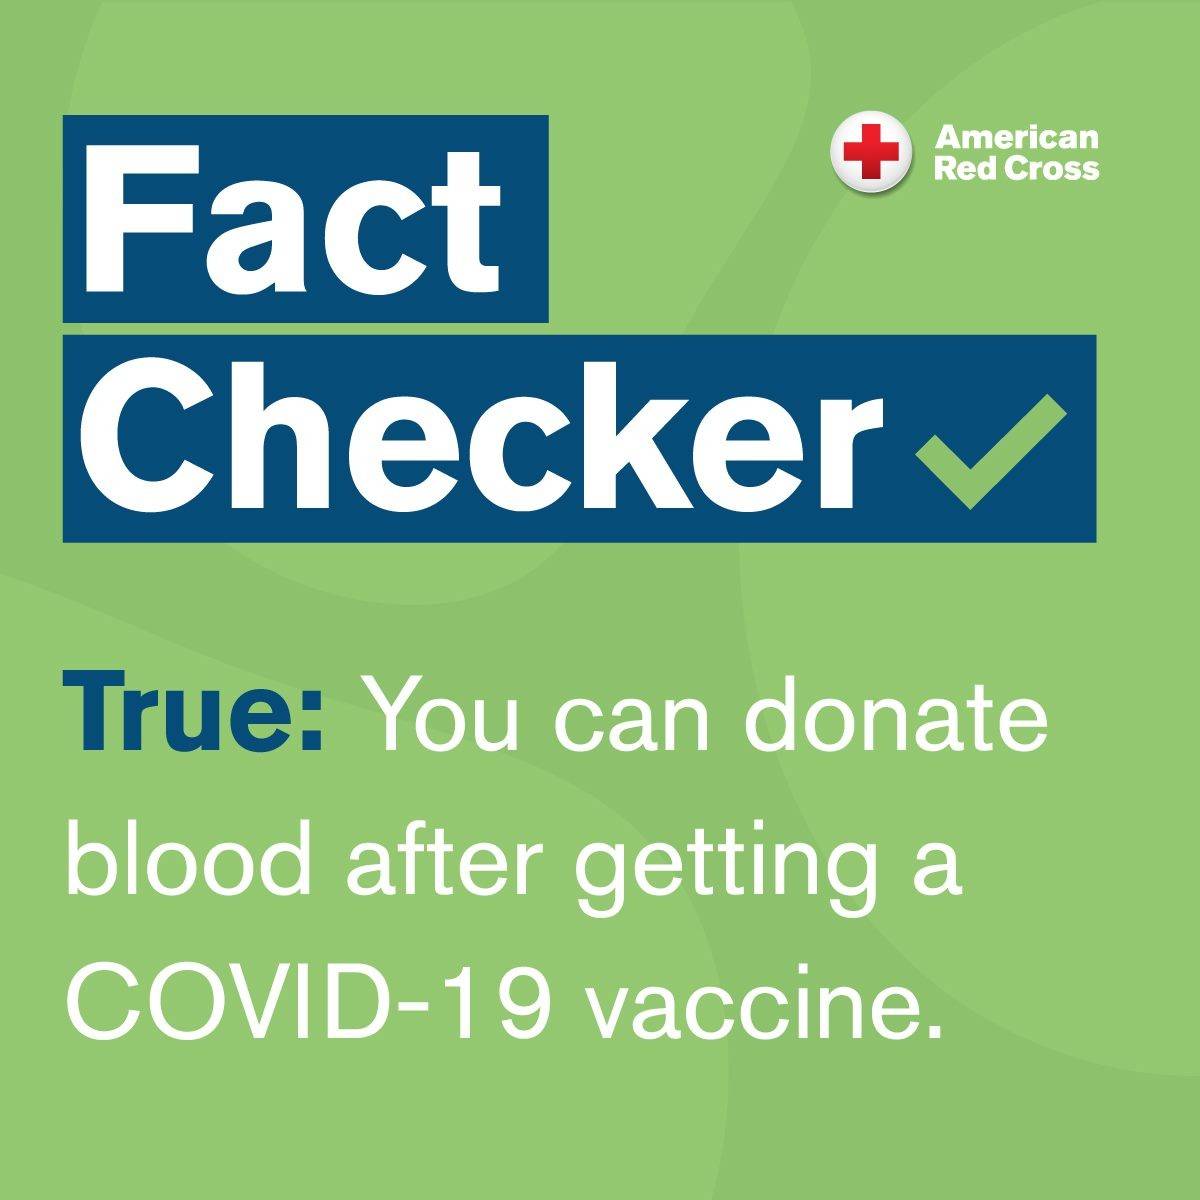 You can donate blood after getting a COVID-19 Vaccine